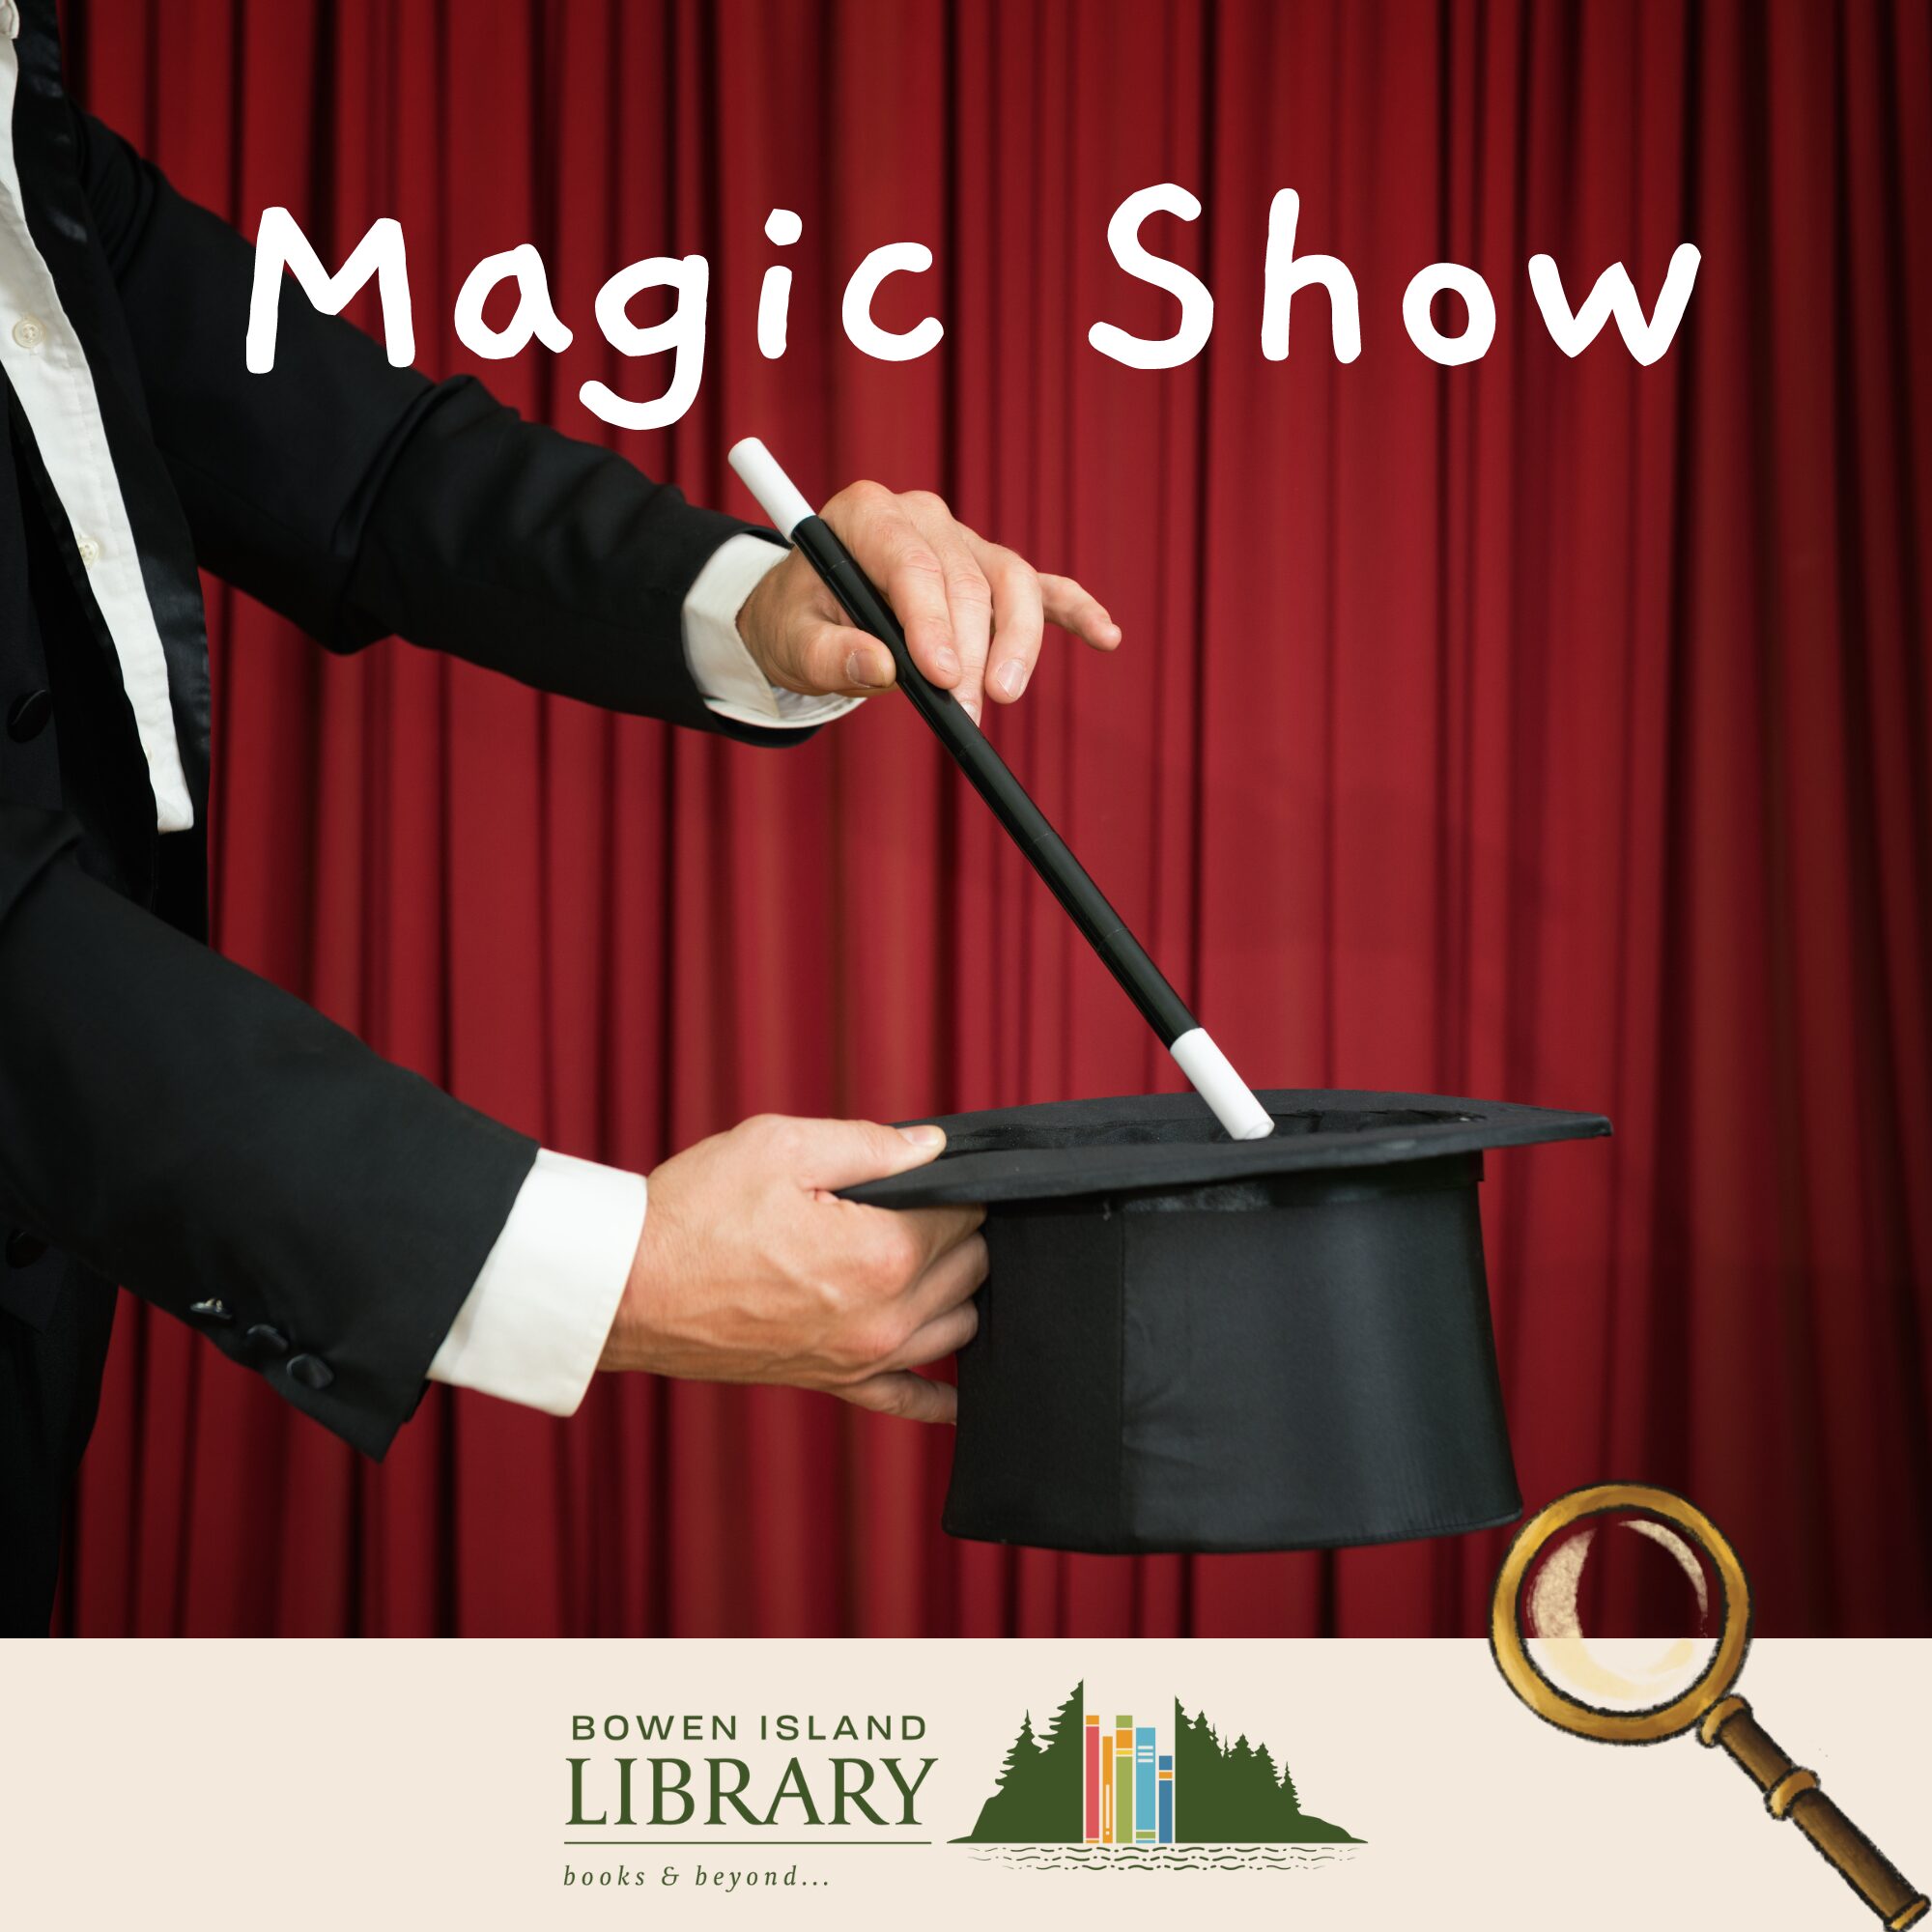 a magician's hands holding a top hat and wand